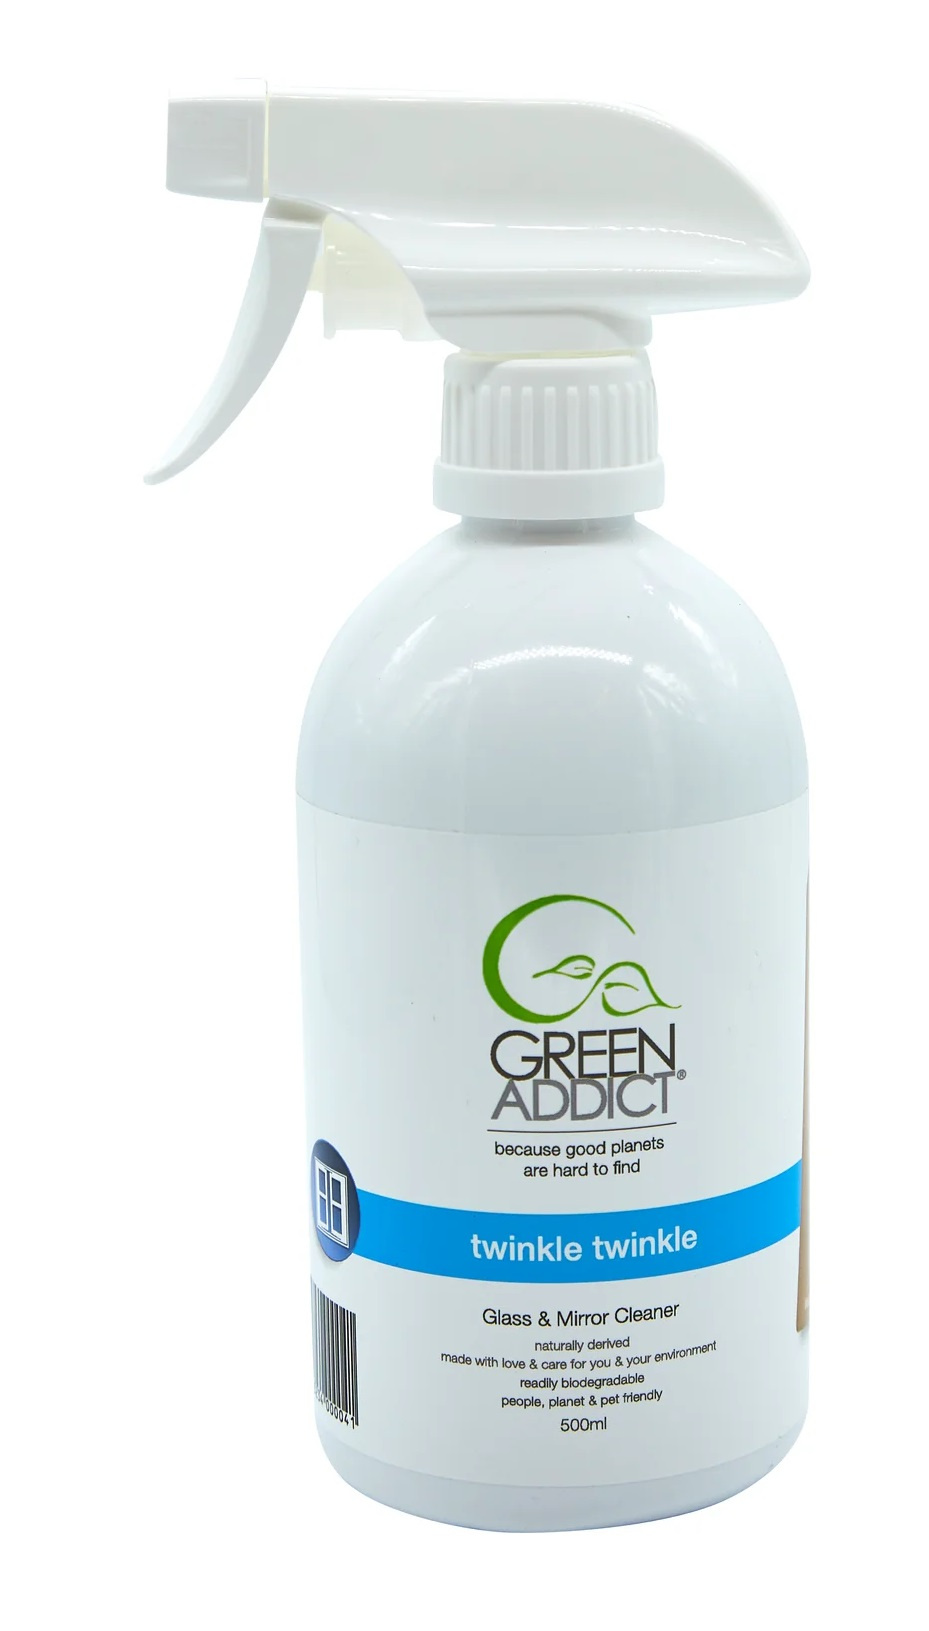 Green Addict Twinkle Twinkle Glass & Mirror Cleaner 500ml